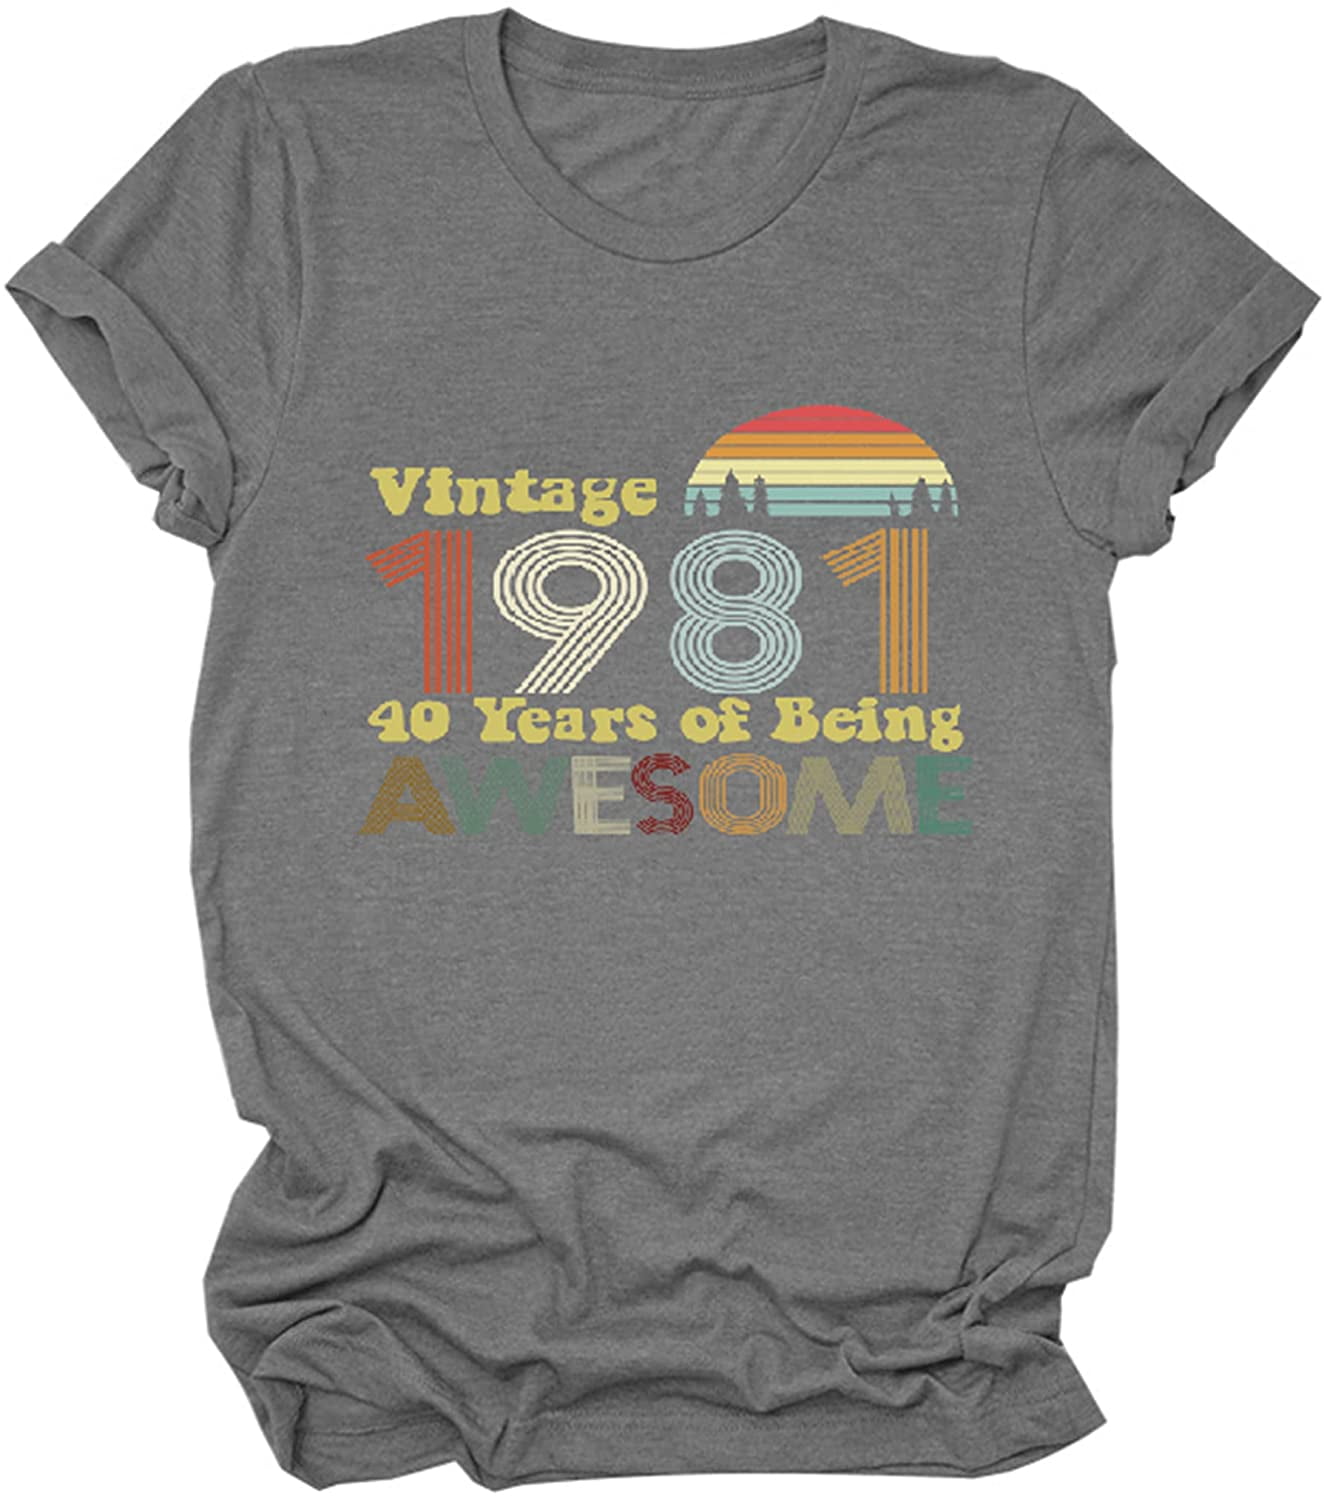 40th Birthday Gifts T Shirts for Women Retro Birthday Graphic Tees Shirt Vintage 1981 Original Parts Funny Casual Tops 